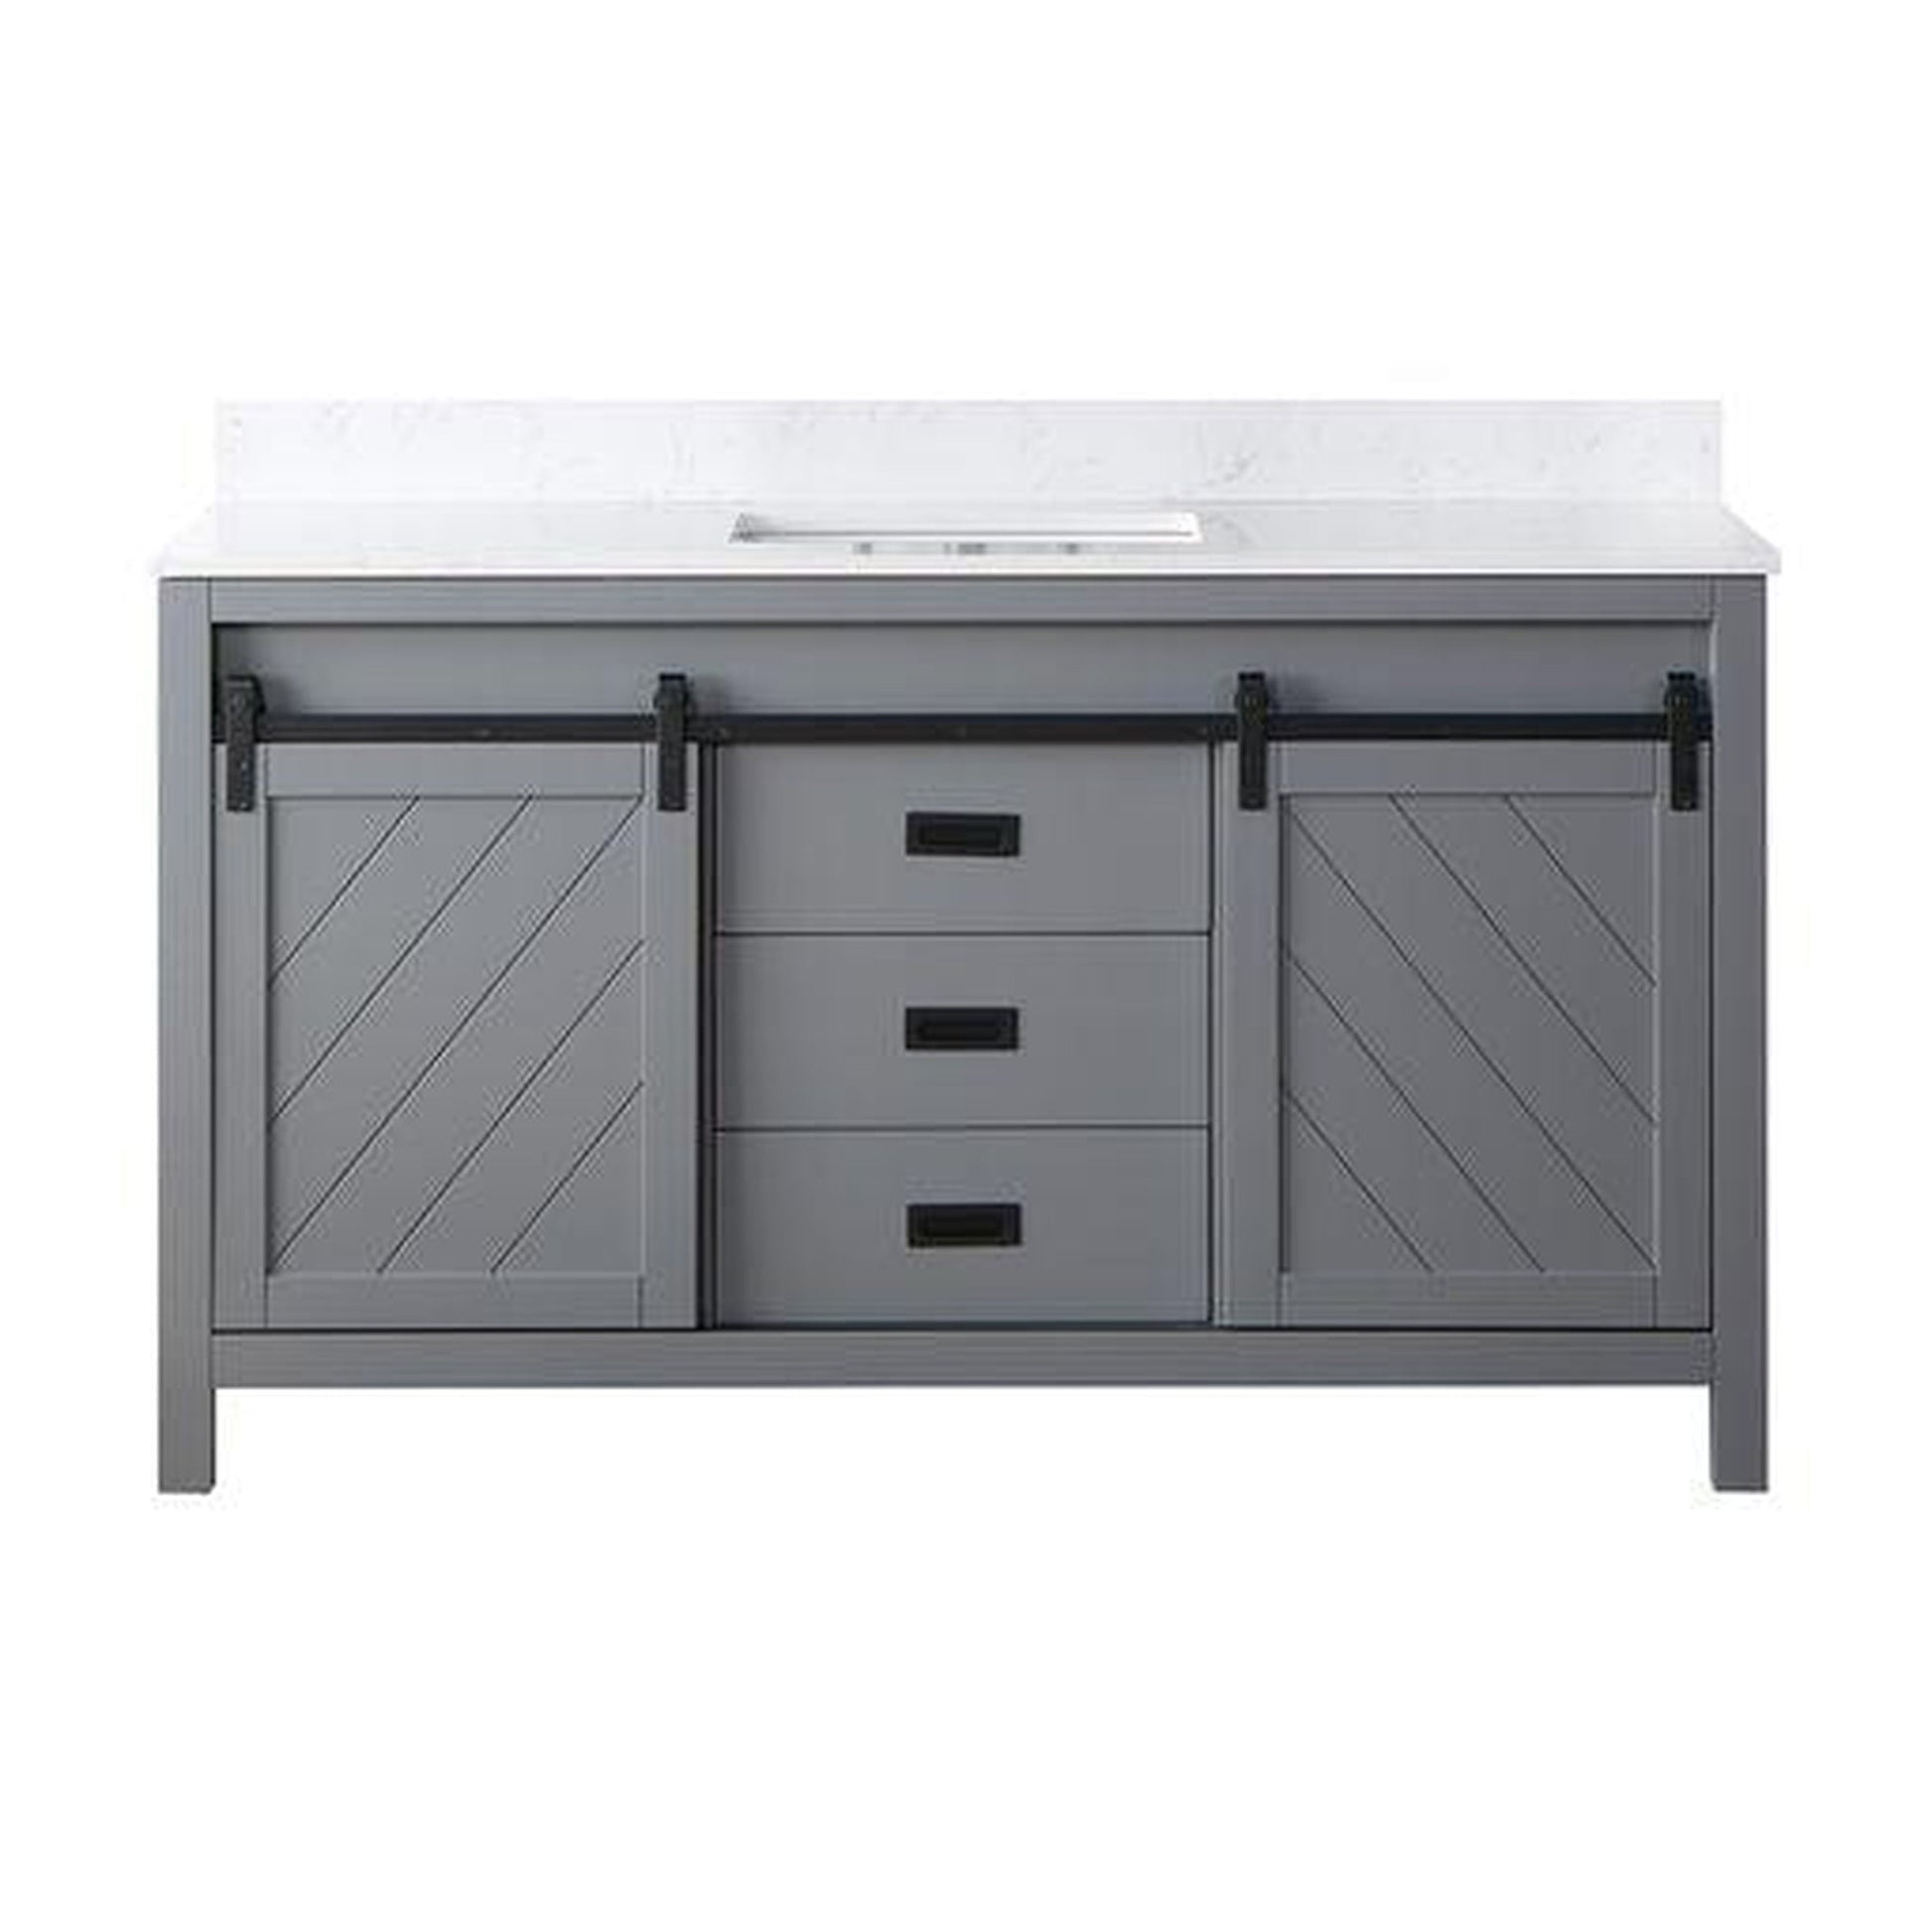 Altair Kinsley 60" Single Gray Freestanding Bathroom Vanity Set With Aosta White Composite Stone Top, Rectangular Undermount Ceramic Sink, and Overflow